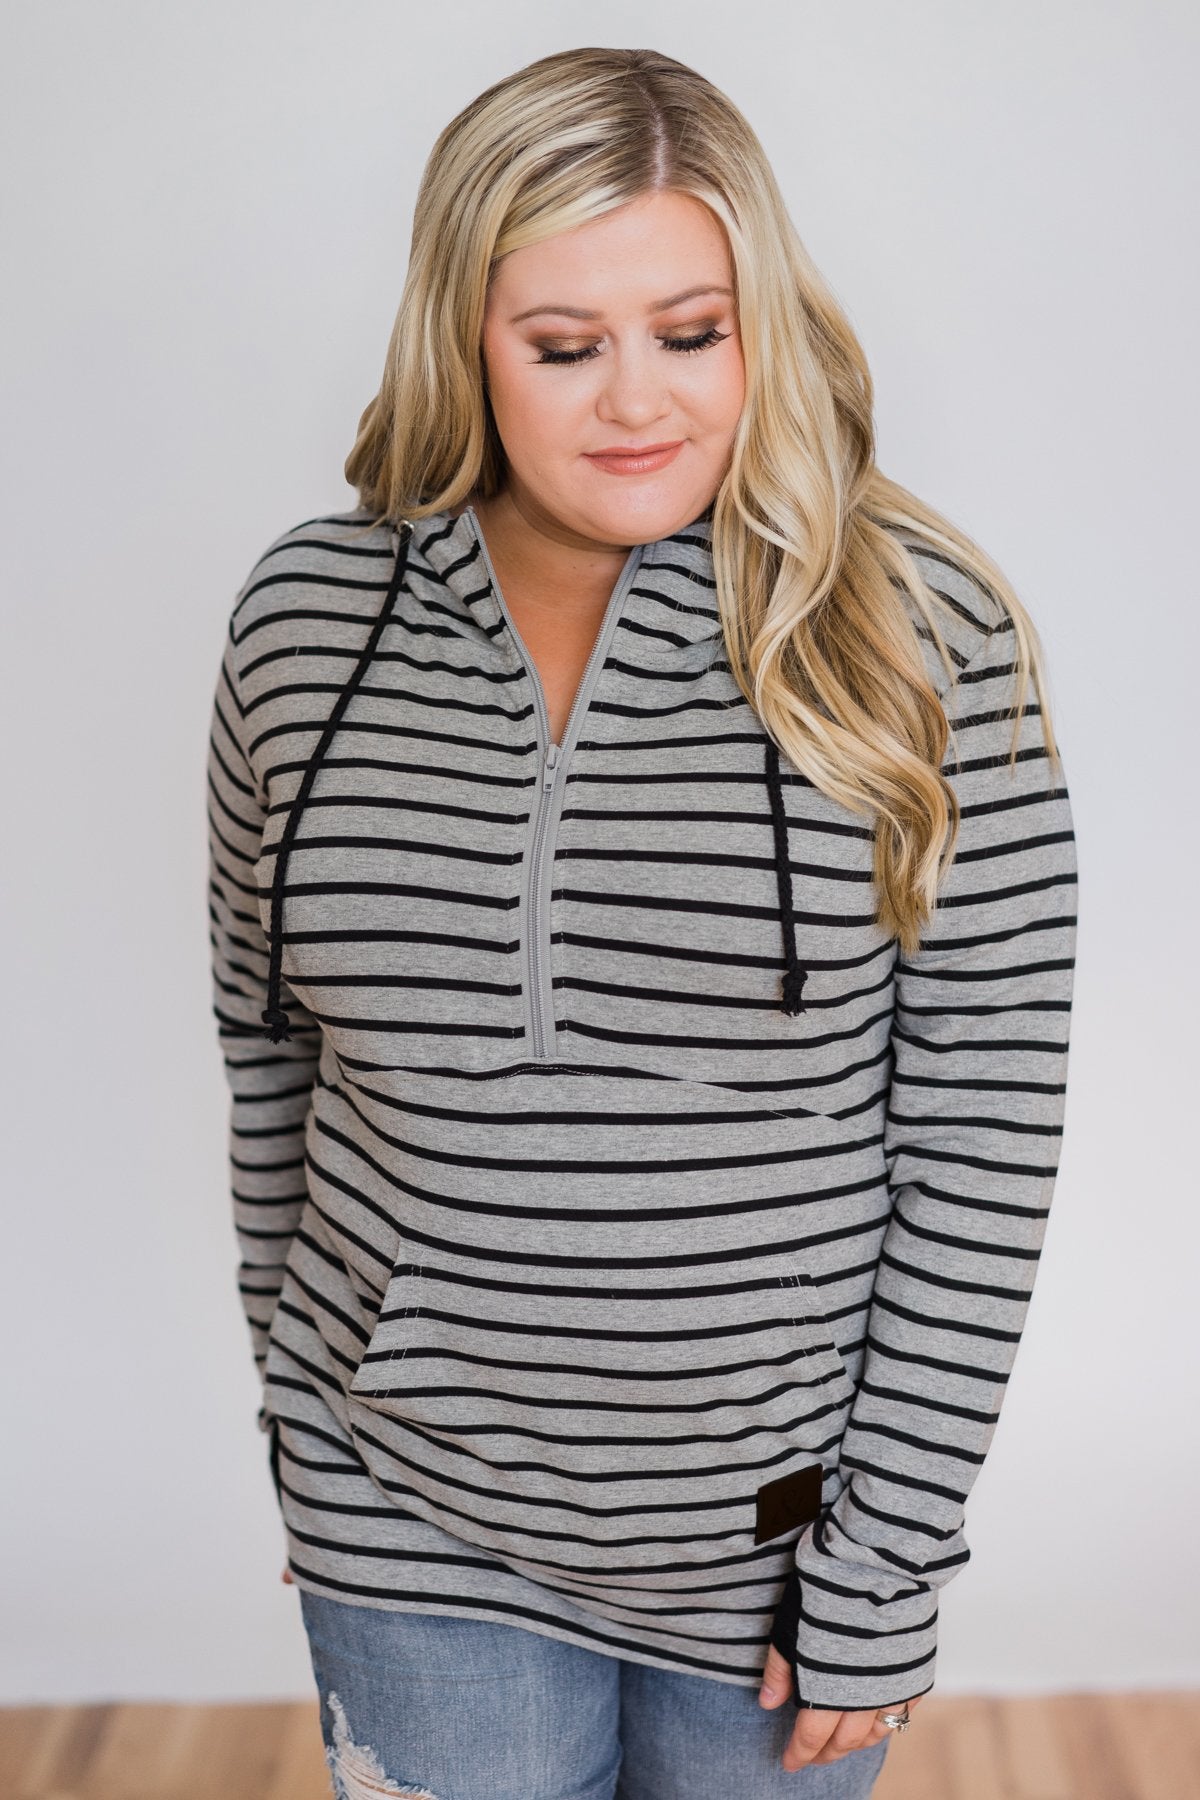 Half Zip Ampersand Hoodie- Grey and Black Striped – The Pulse Boutique